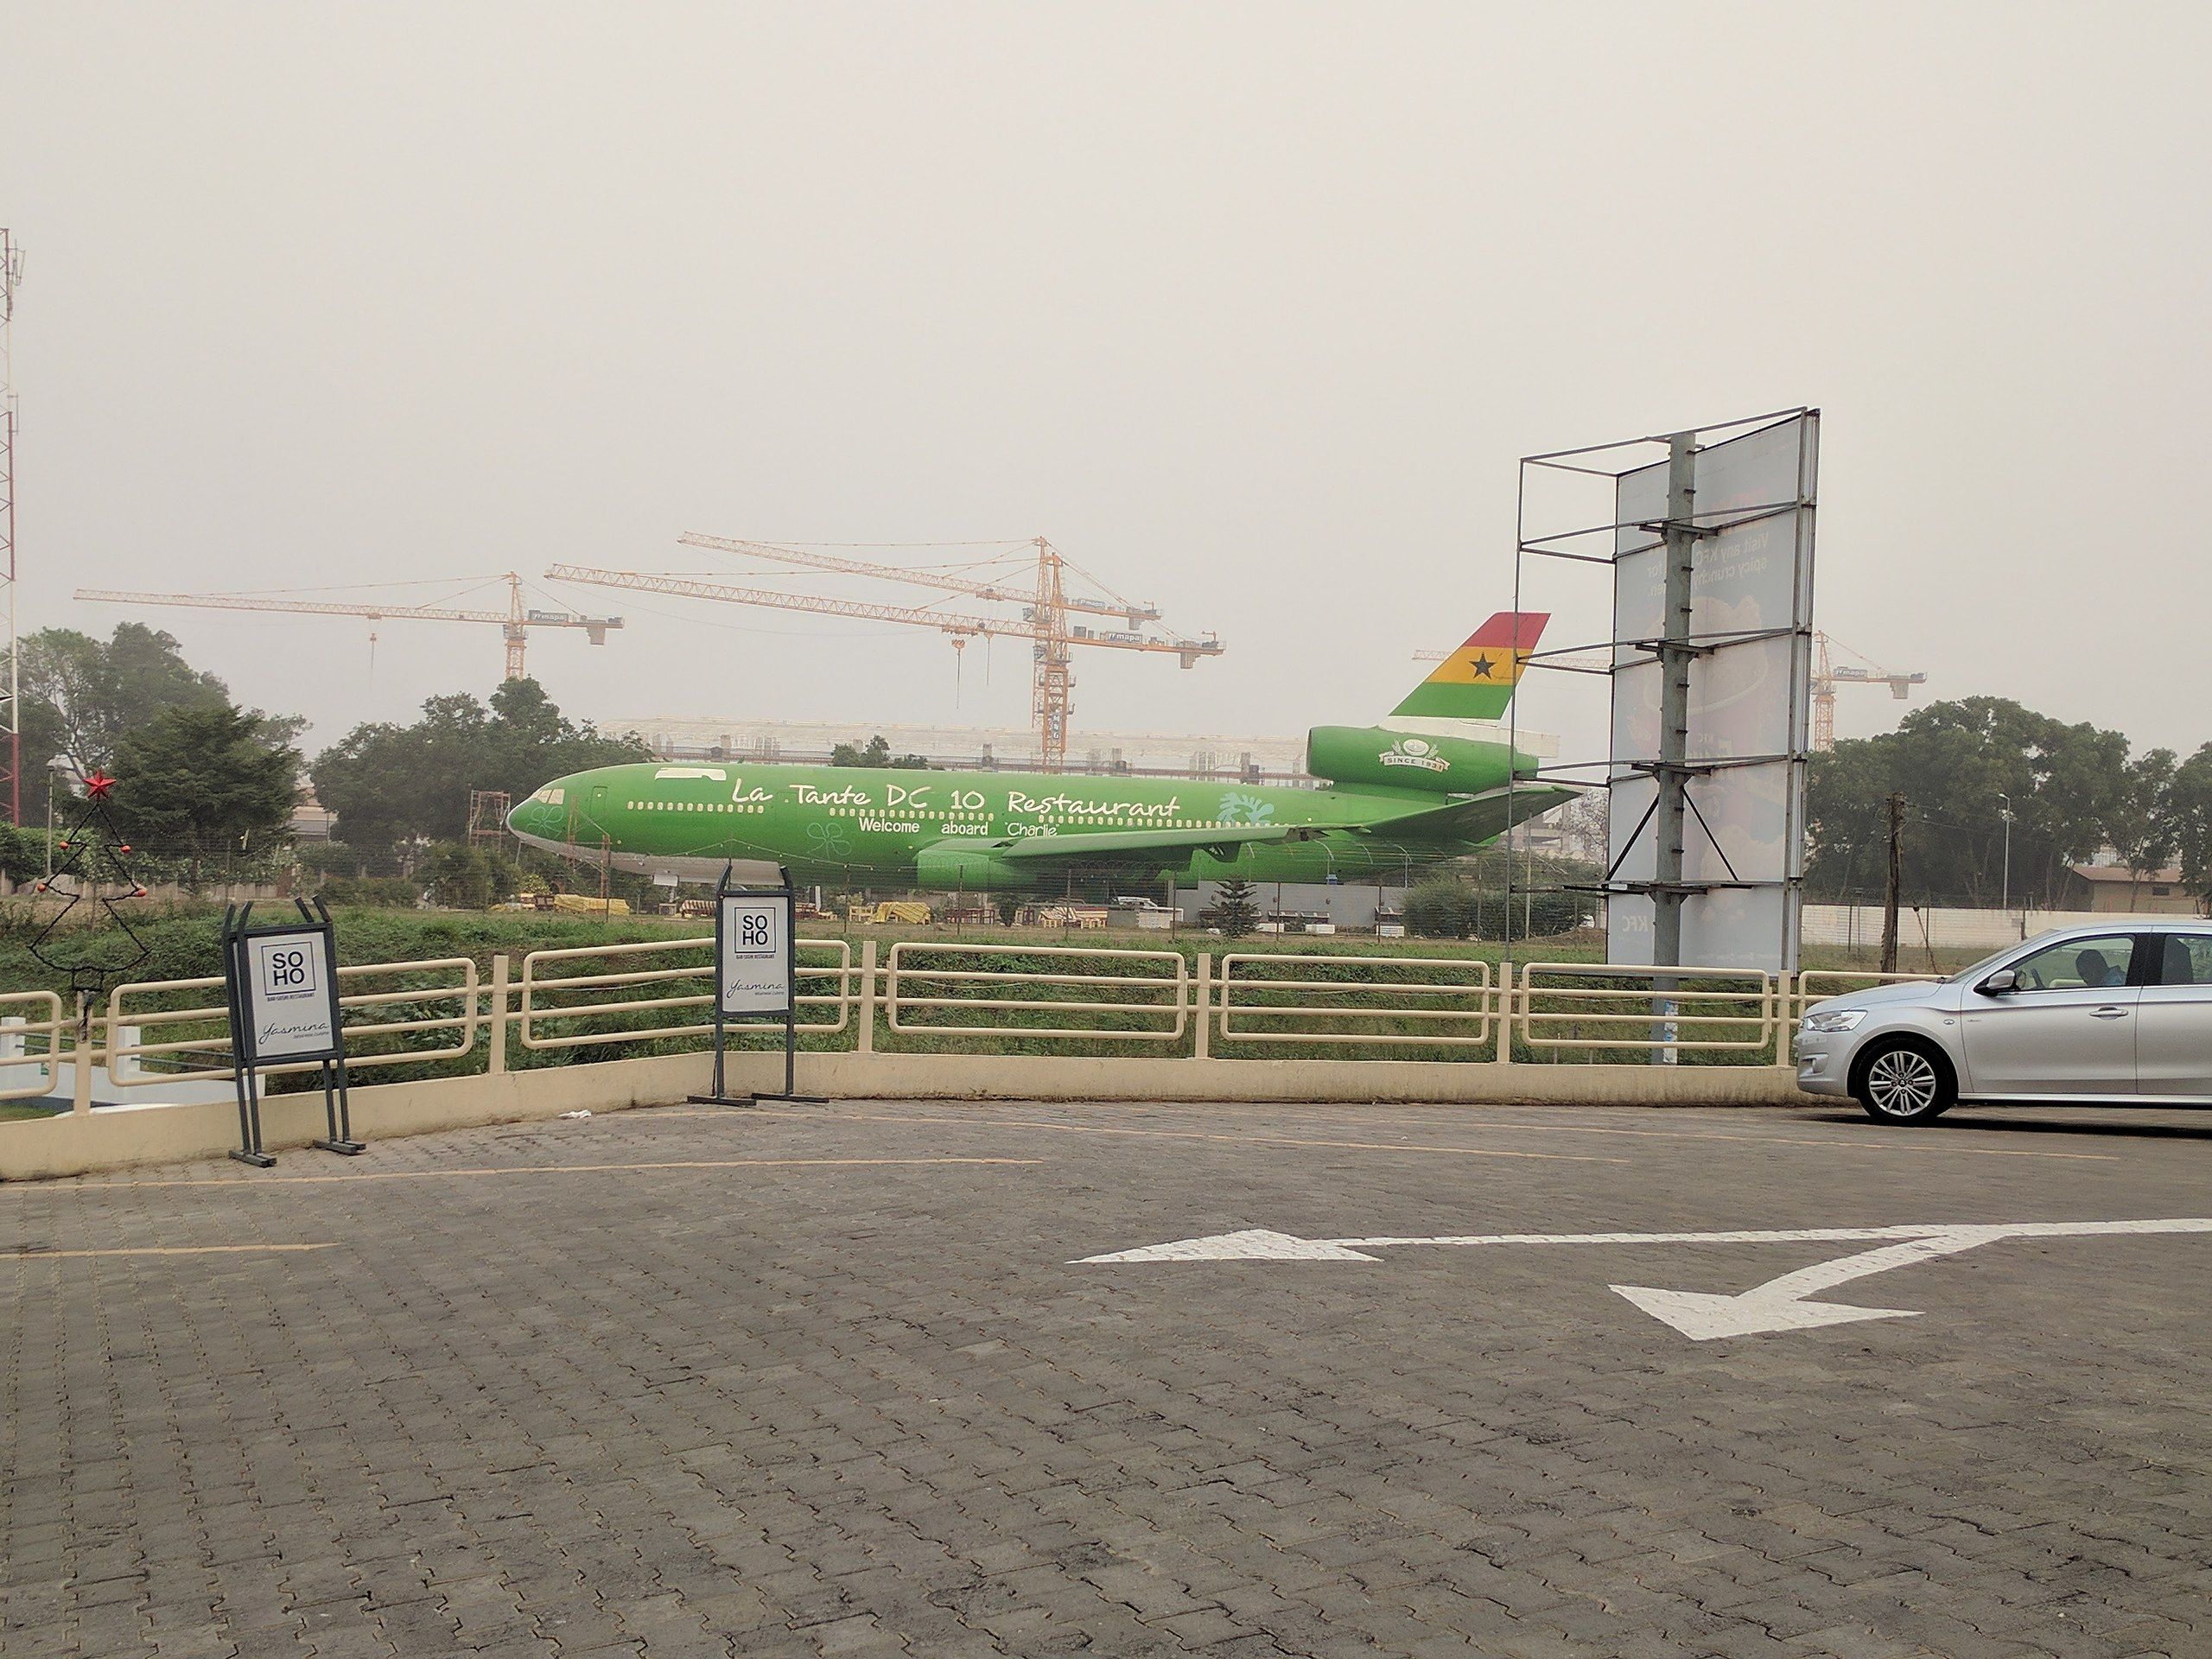 A view of the Ghana DC-10 Restaurant from a nearby street.